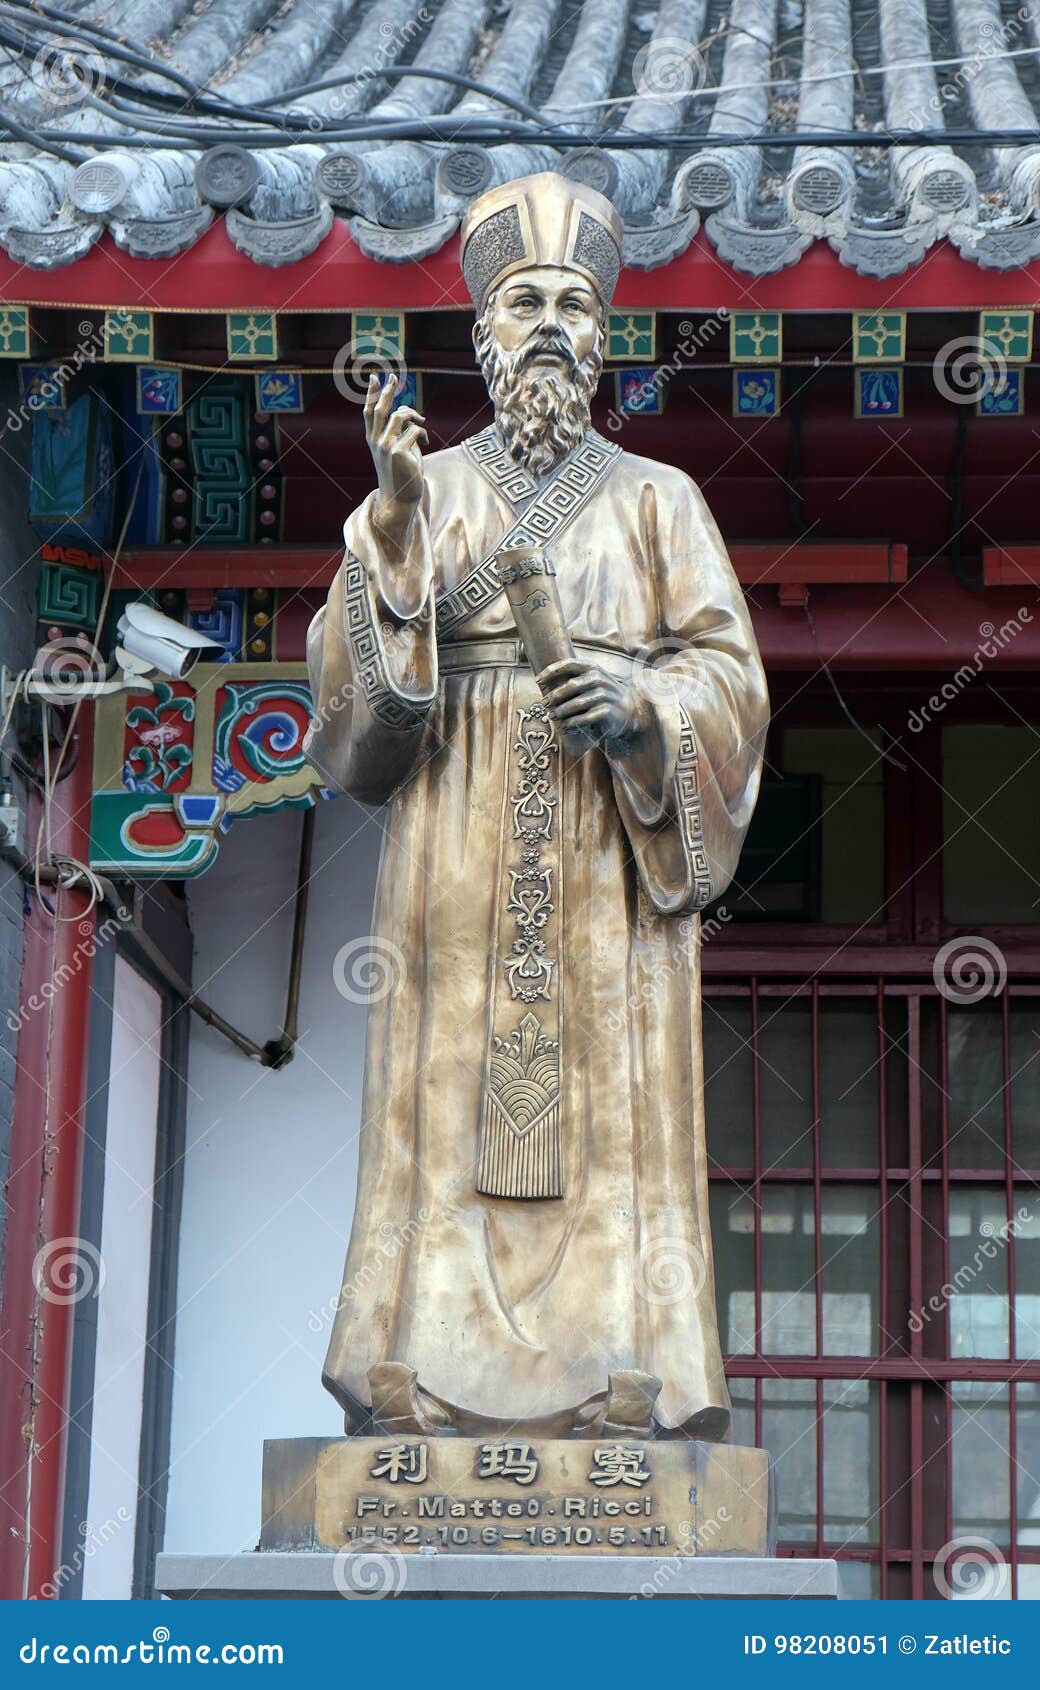 fr. matteo ricci statue in front saint joseph cathedral in beijing